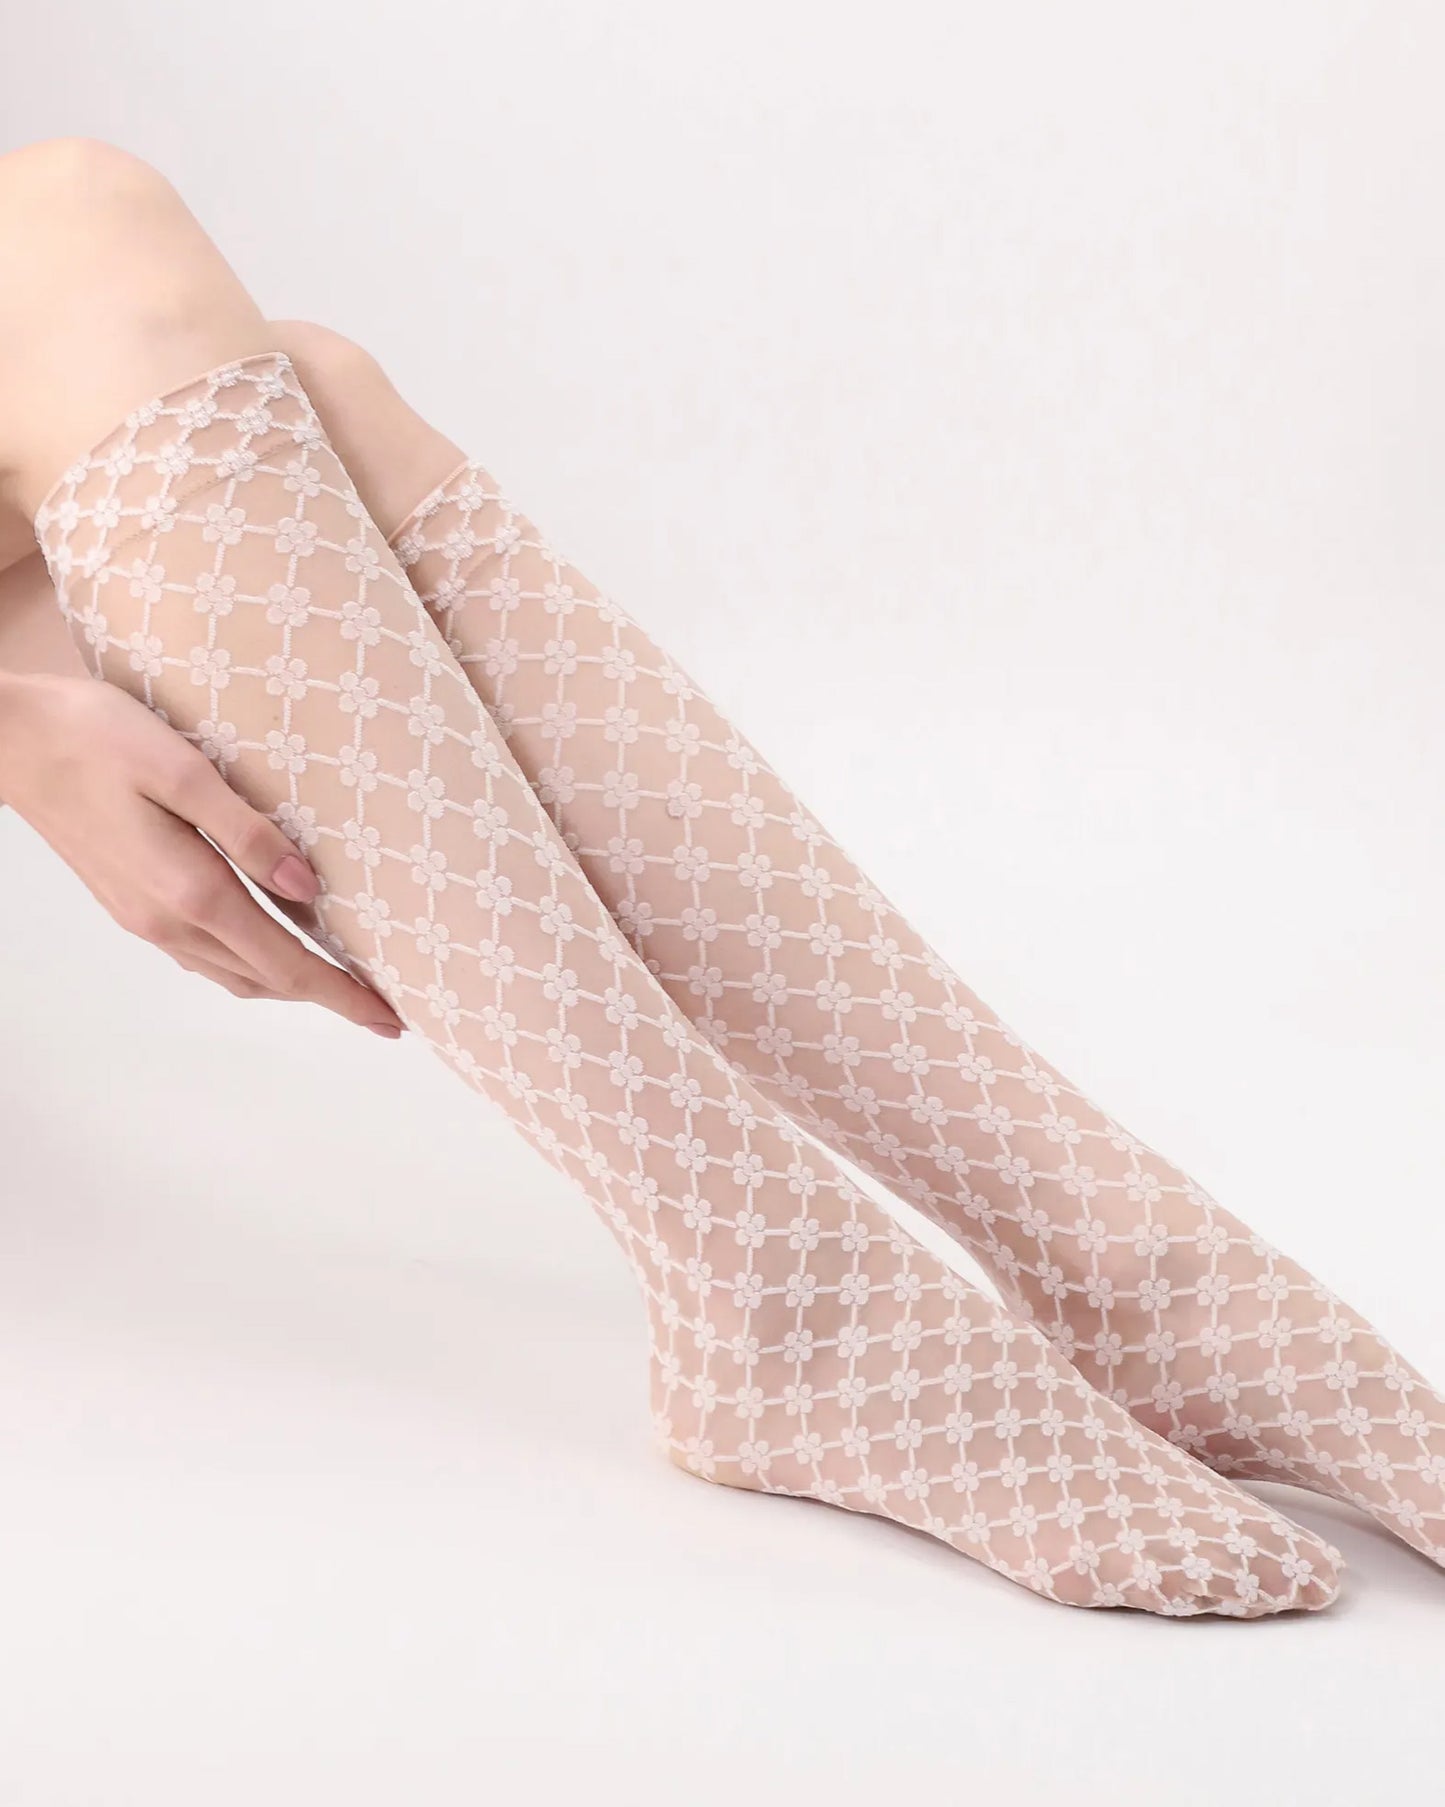 Oroblù Stylish Motif Gambaletto - Sheer light natural nude fashion knee-high socks with a woven white flower and diamond pattern and invisible elasticated comfort cuff.